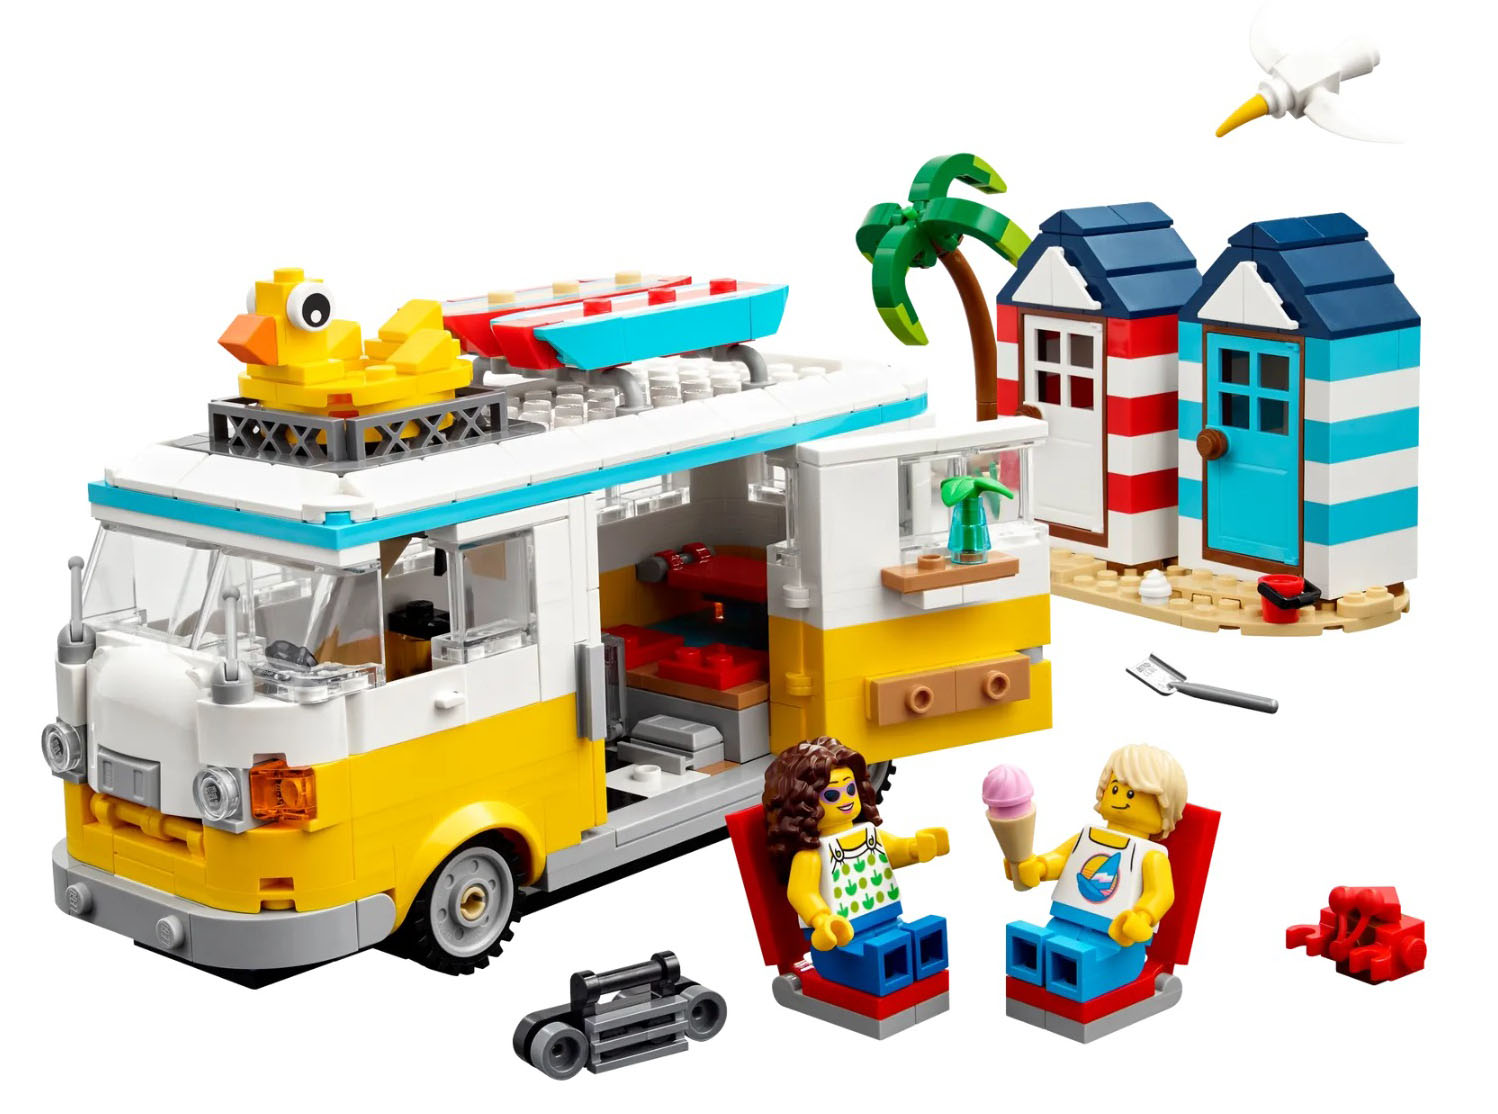 LEGO (R) Creator New Product Information